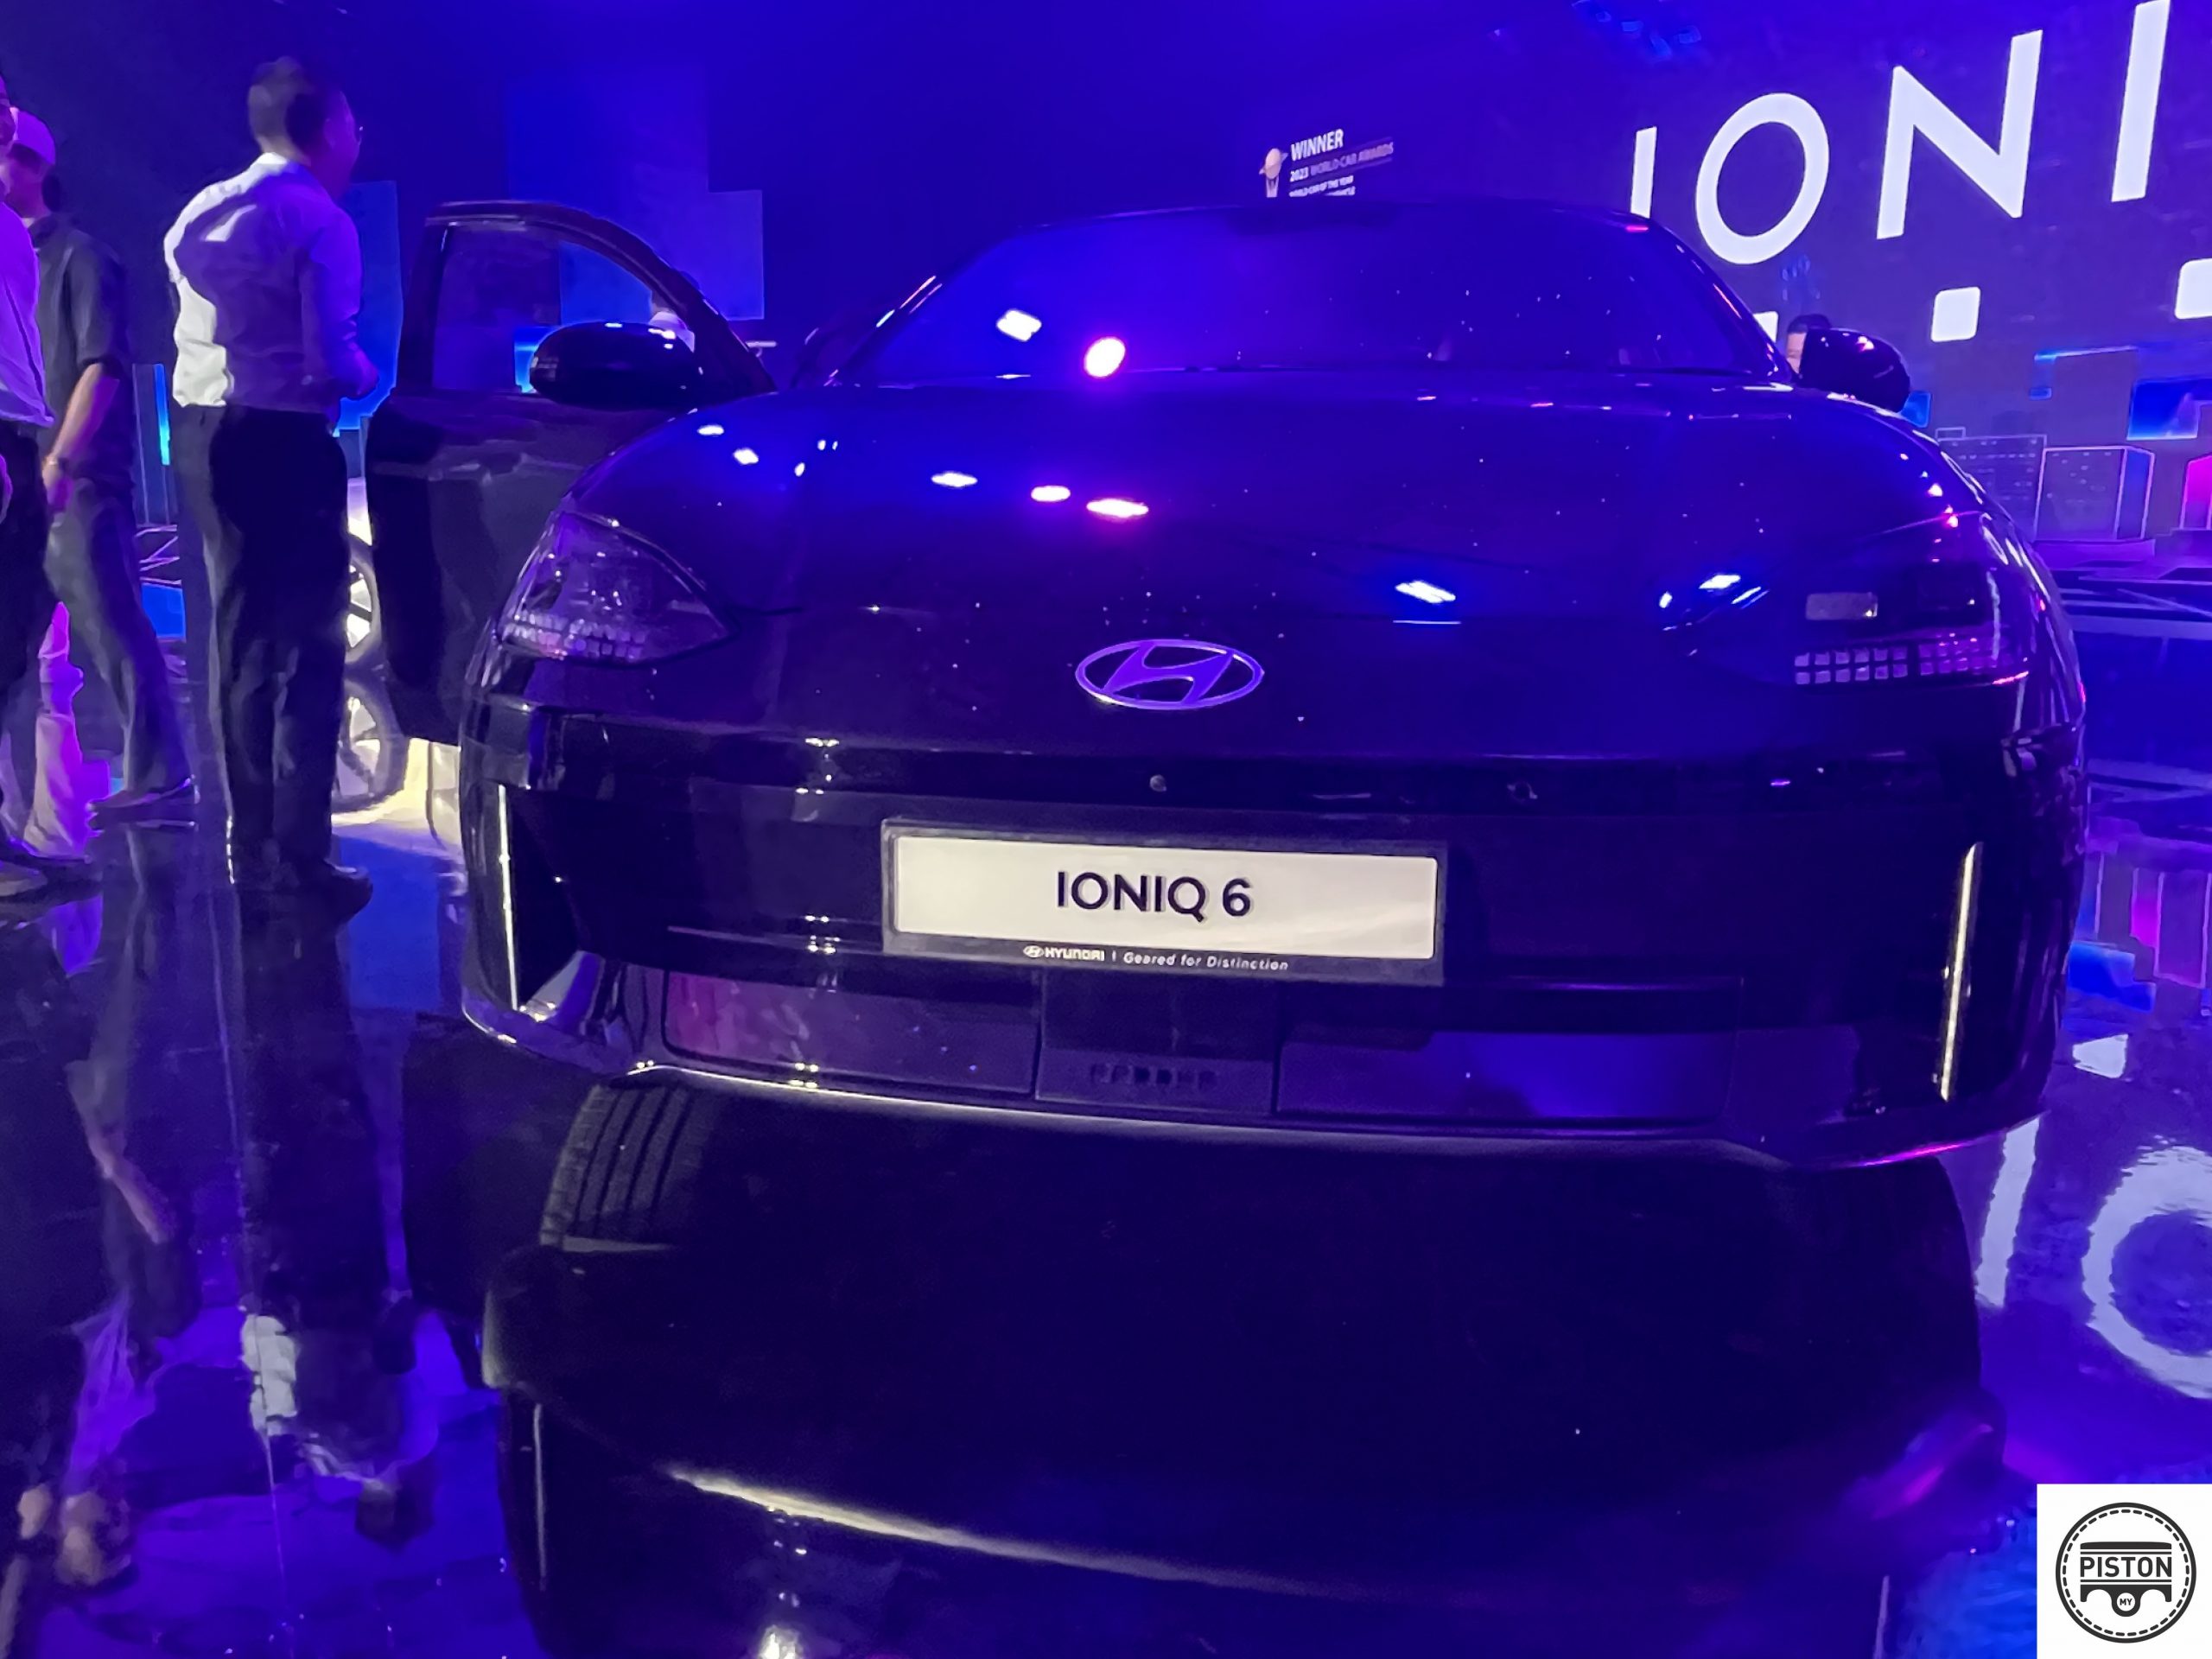 hyundai ioniq 6 launched in malaysia; starting from rm289,888!